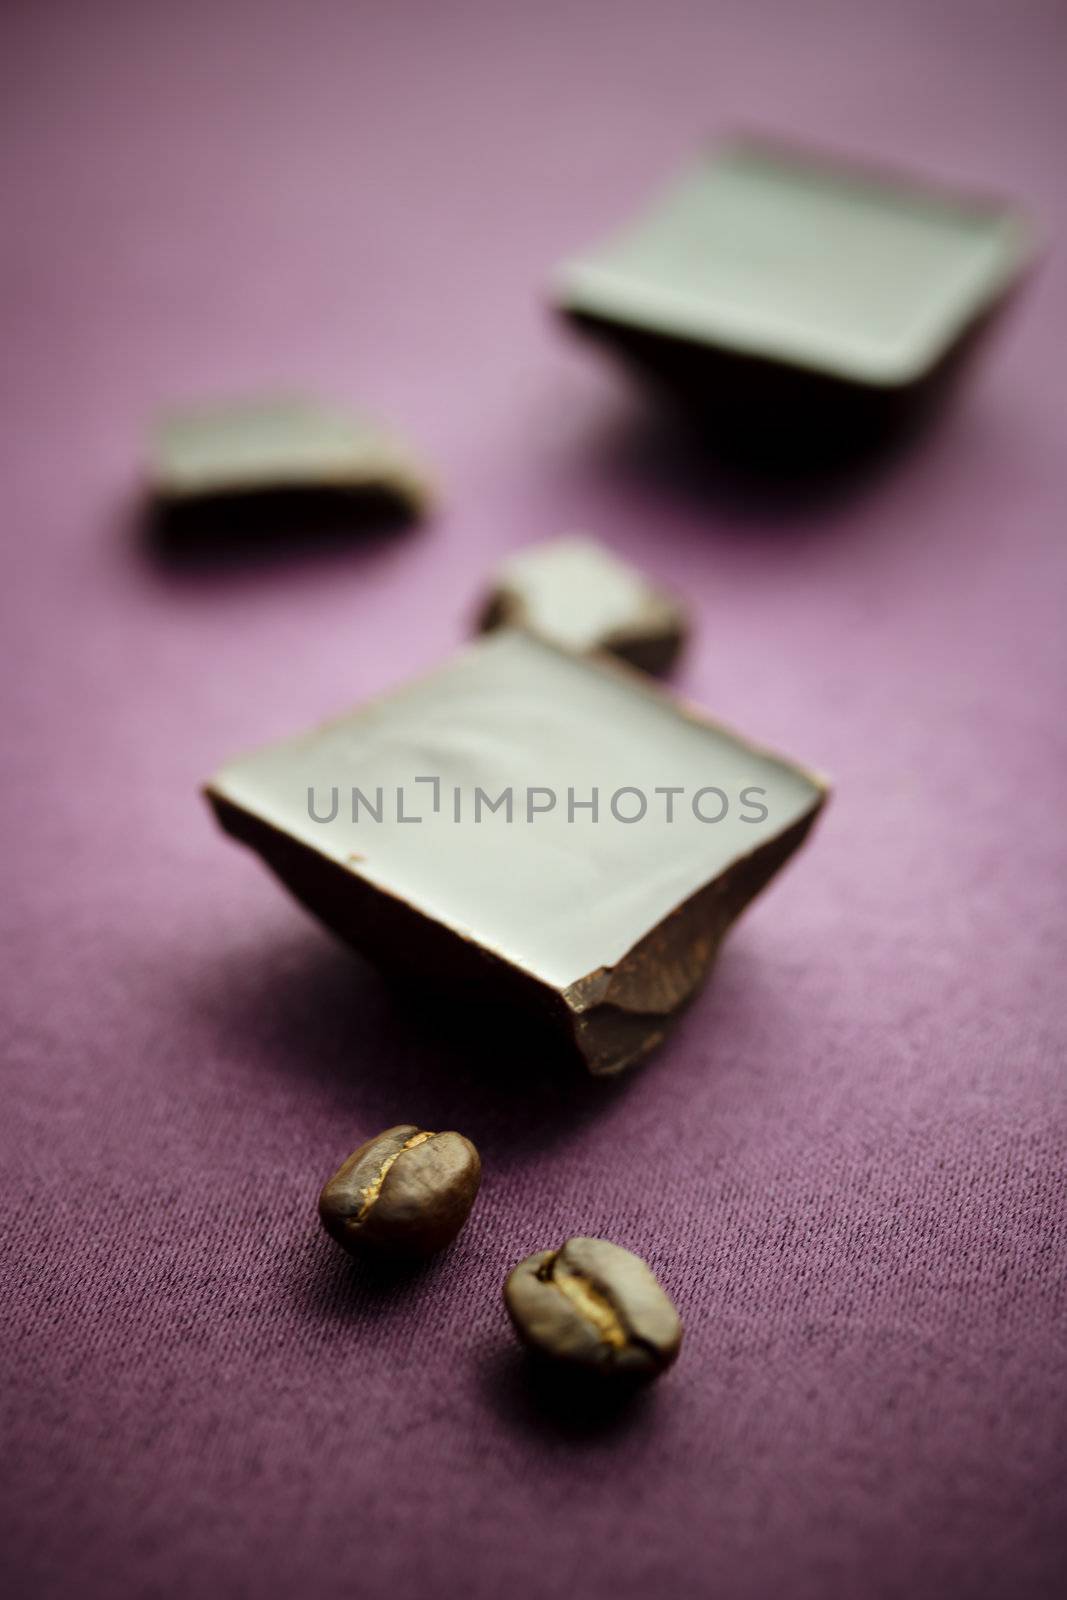 Chocolate with coffee beans by melpomene